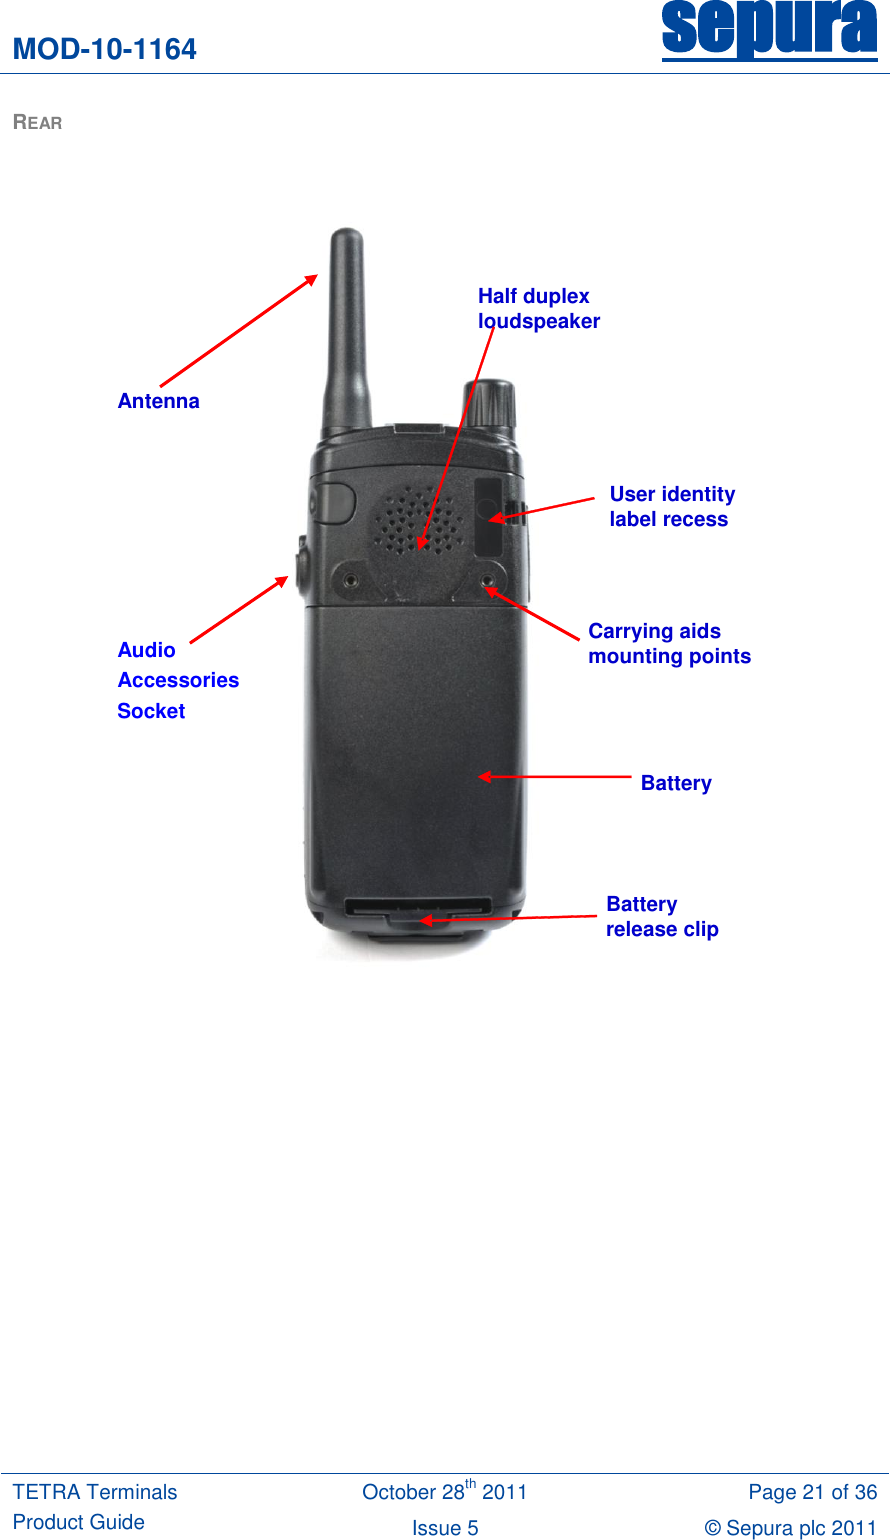 MOD-10-1164 sepura  TETRA Terminals Product Guide October 28th 2011 Page 21 of 36 Issue 5 © Sepura plc 2011   REAR                  Half duplex  loudspeaker Antenna   User identity  label recess Carrying aids  mounting points Battery Battery  release clip Audio Accessories Socket 